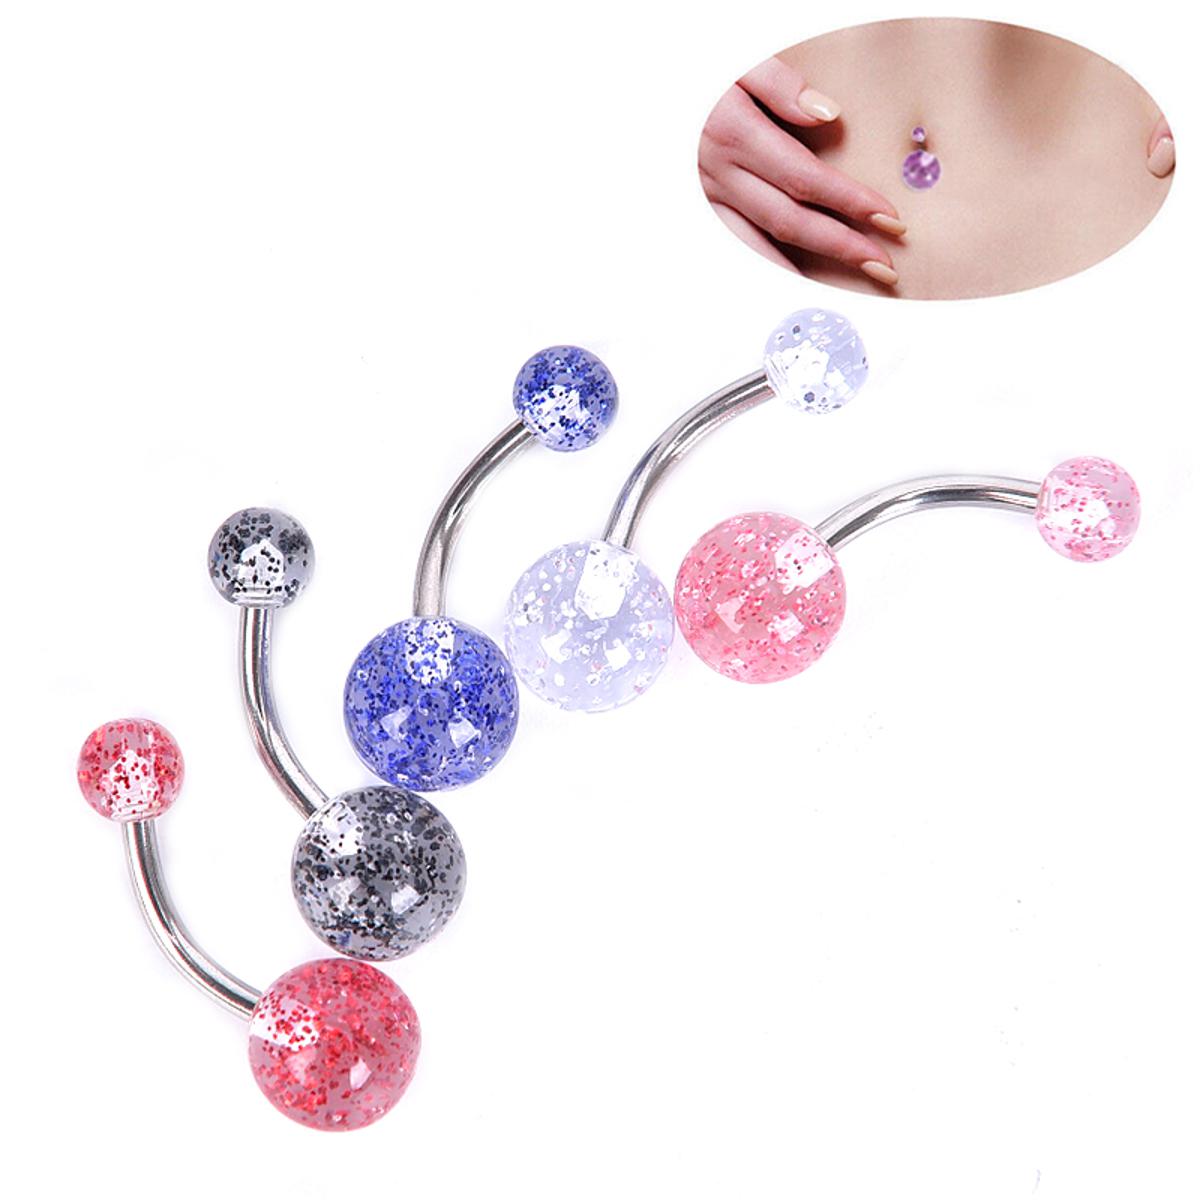 New Vintage Cat Pet Charm Design Belly Ring Body Jewelry Pierc Button Navel